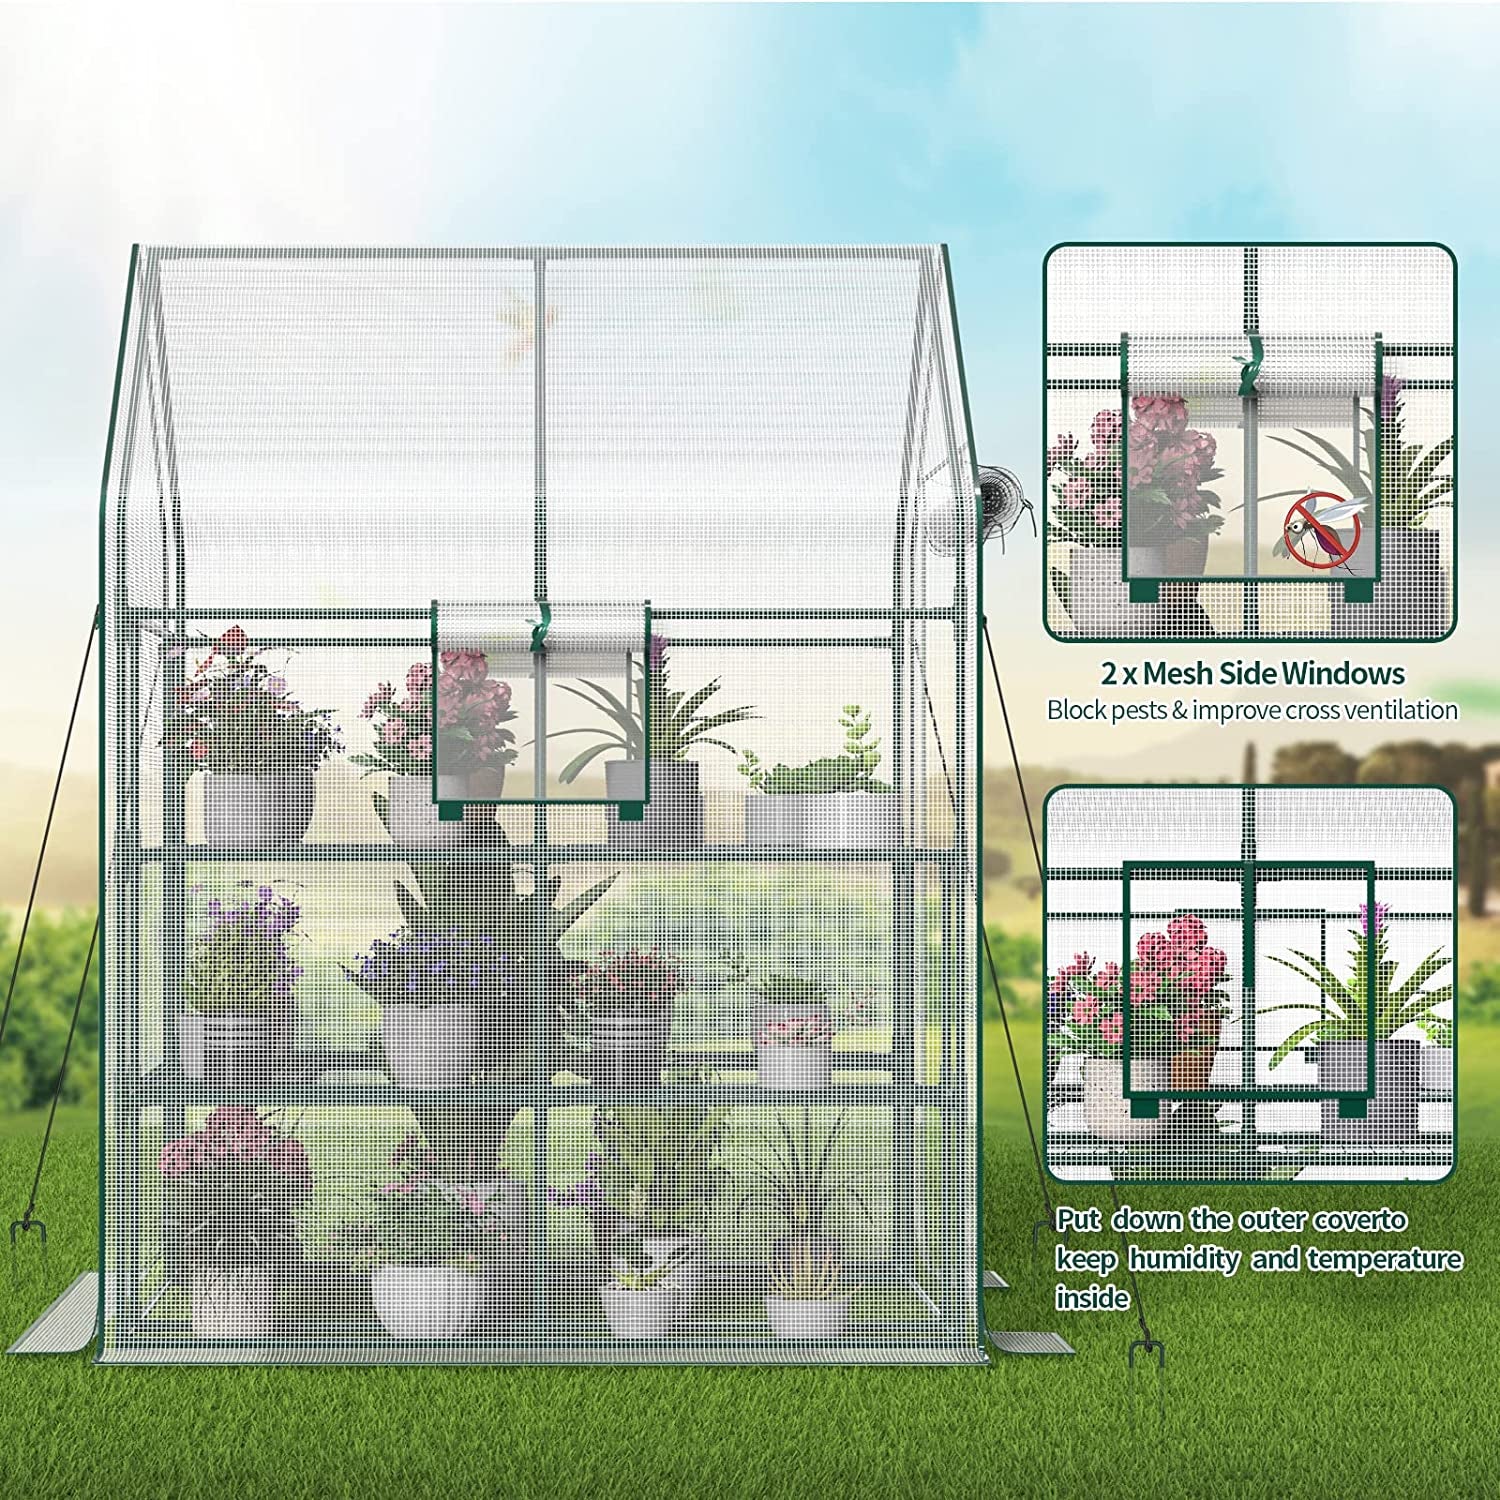 Greenhouse with 2 Mesh Windows, 4 Tiers, and 10 Shelves - Durable PE Cover, Pegs and Ropes for Stability- Perfect for Outdoor Gardens, Plants, Herbs, and Flowers - Design By Technique